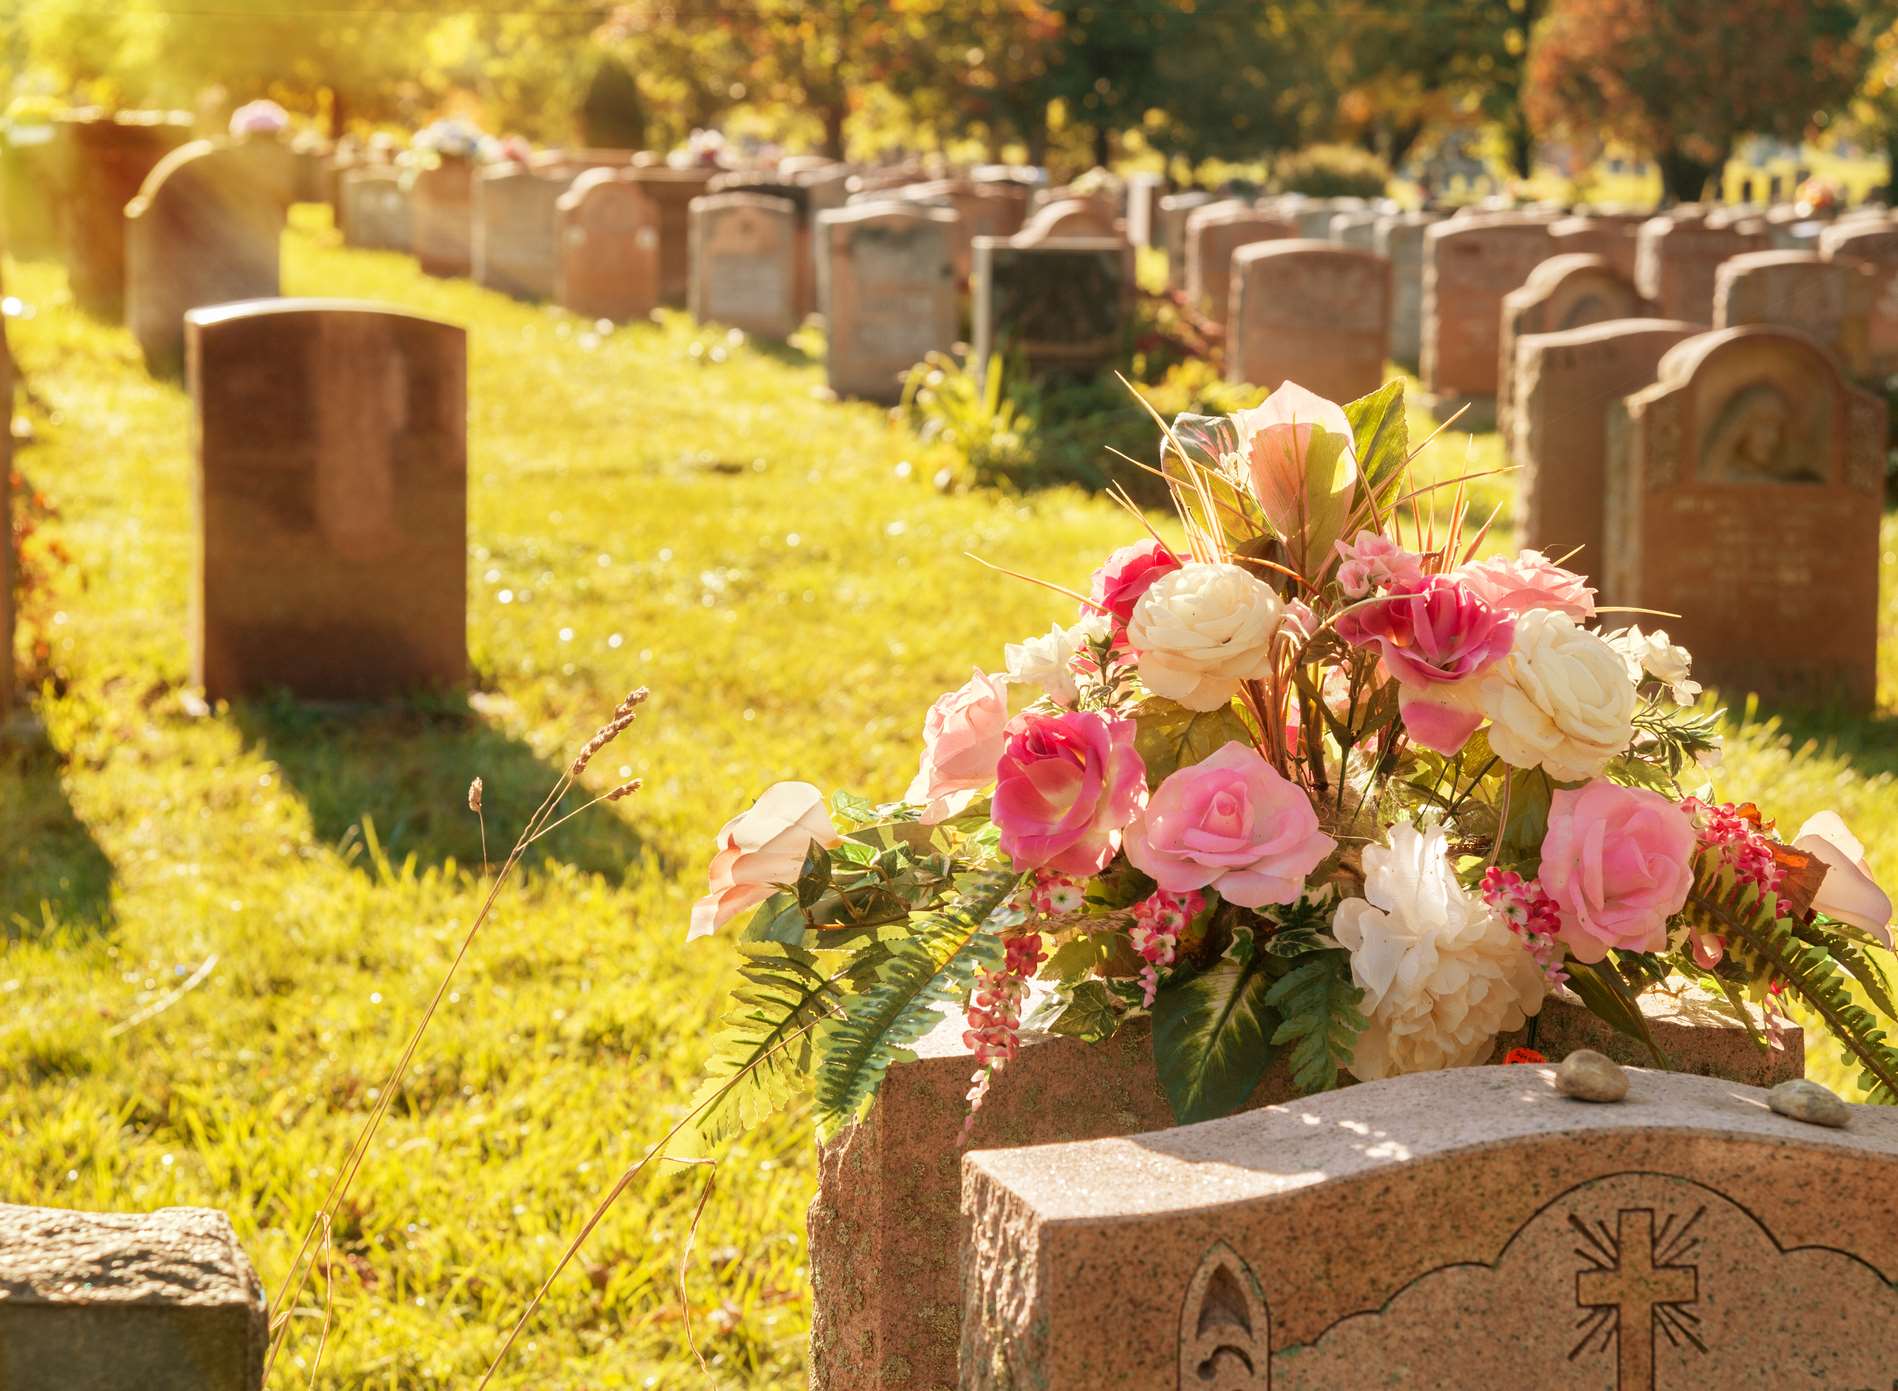 There are calls to scrap burial fees for children. Library image.